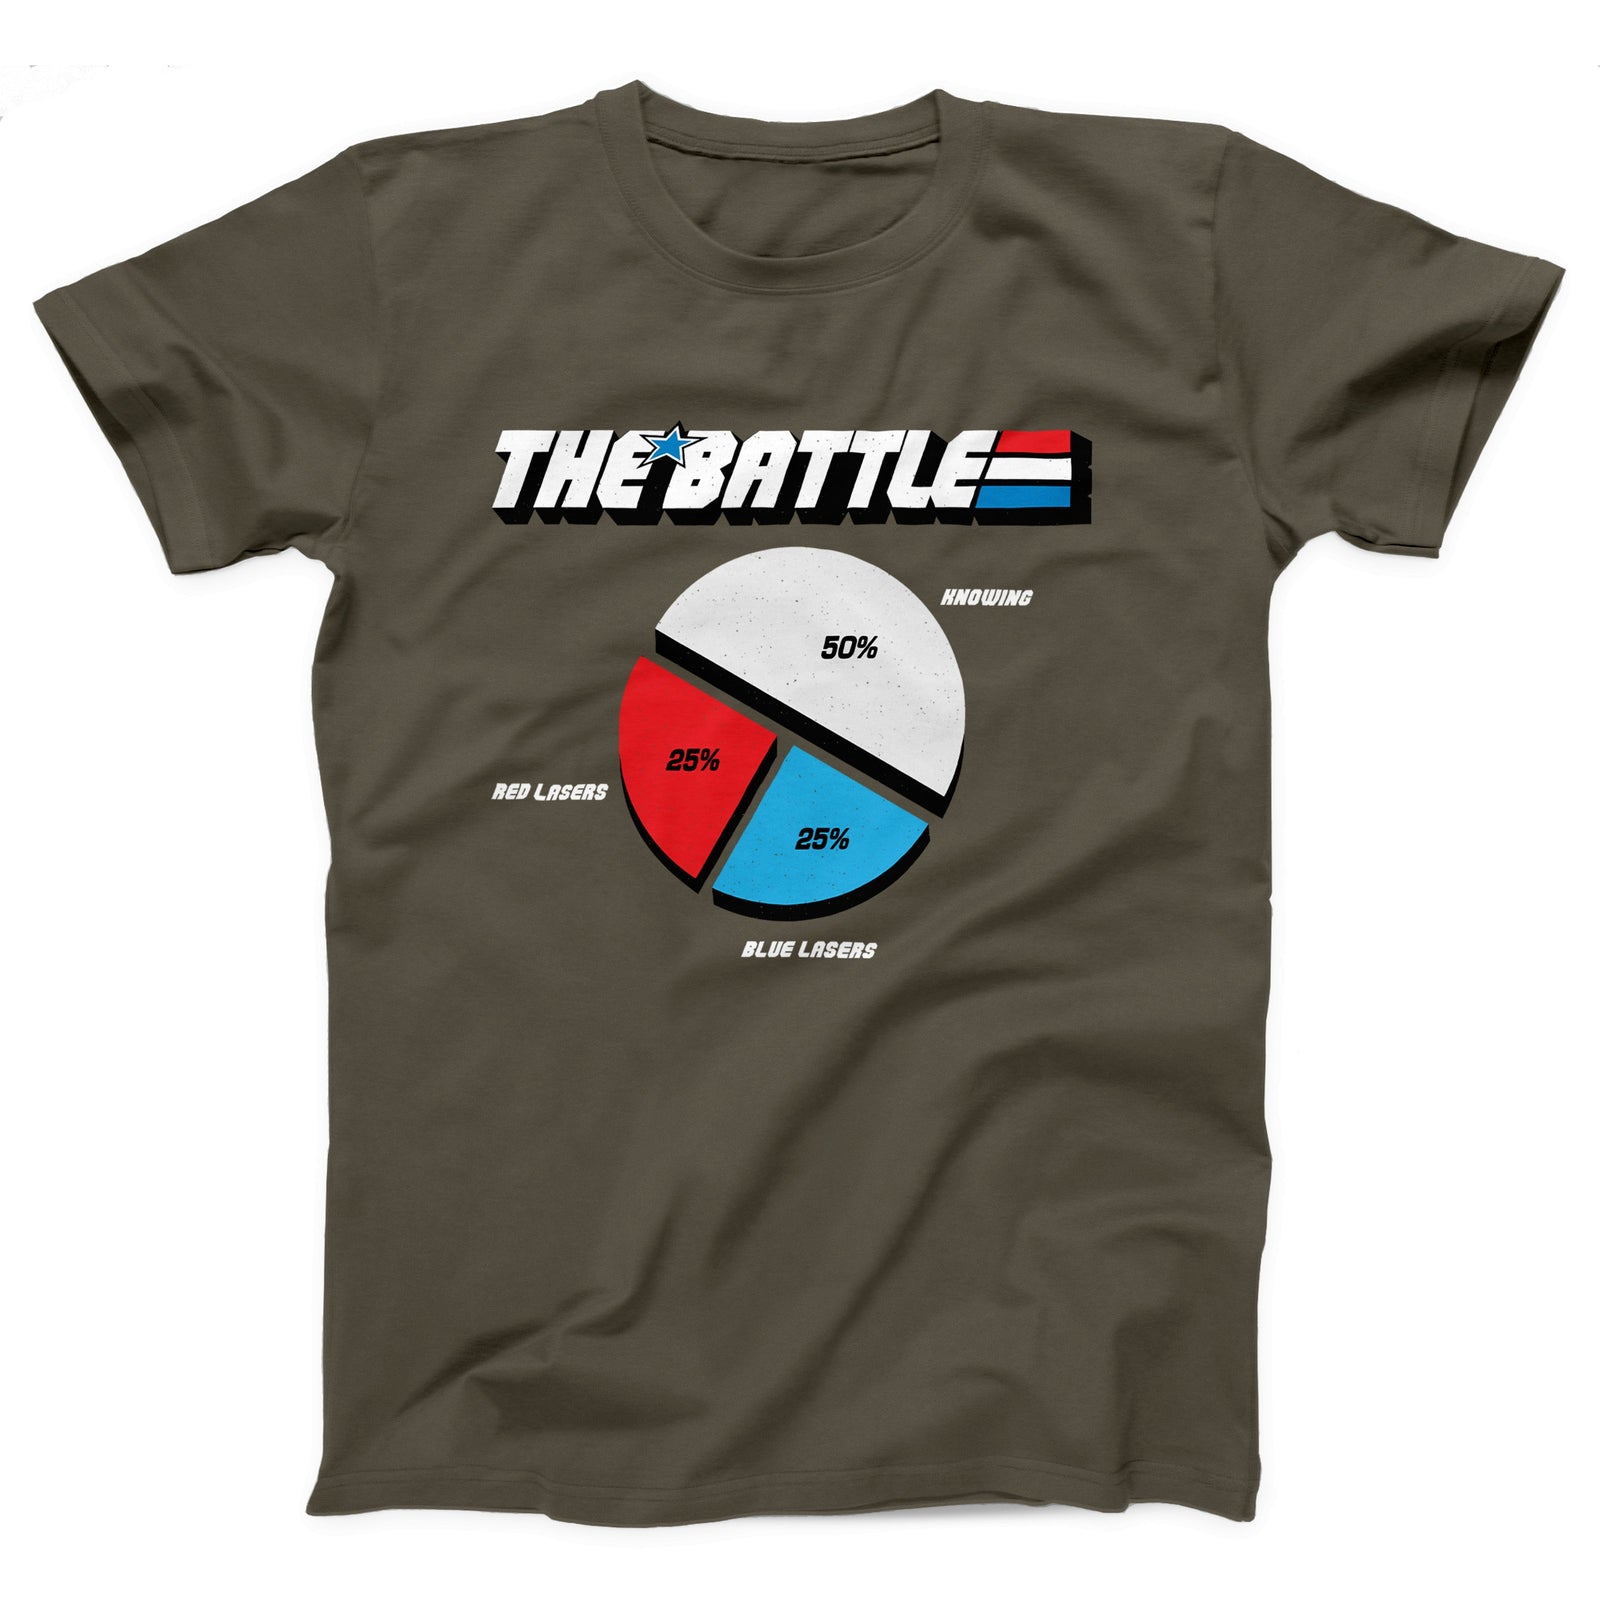 //cdn.shopify.com/s/files/1/0274/2488/2766/products/the-battle-menunisex-t-shirt-592896_5000x.jpg?v=1662706113 5000w,
    //cdn.shopify.com/s/files/1/0274/2488/2766/products/the-battle-menunisex-t-shirt-592896_4500x.jpg?v=1662706113 4500w,
    //cdn.shopify.com/s/files/1/0274/2488/2766/products/the-battle-menunisex-t-shirt-592896_4000x.jpg?v=1662706113 4000w,
    //cdn.shopify.com/s/files/1/0274/2488/2766/products/the-battle-menunisex-t-shirt-592896_3500x.jpg?v=1662706113 3500w,
    //cdn.shopify.com/s/files/1/0274/2488/2766/products/the-battle-menunisex-t-shirt-592896_3000x.jpg?v=1662706113 3000w,
    //cdn.shopify.com/s/files/1/0274/2488/2766/products/the-battle-menunisex-t-shirt-592896_2500x.jpg?v=1662706113 2500w,
    //cdn.shopify.com/s/files/1/0274/2488/2766/products/the-battle-menunisex-t-shirt-592896_2000x.jpg?v=1662706113 2000w,
    //cdn.shopify.com/s/files/1/0274/2488/2766/products/the-battle-menunisex-t-shirt-592896_1800x.jpg?v=1662706113 1800w,
    //cdn.shopify.com/s/files/1/0274/2488/2766/products/the-battle-menunisex-t-shirt-592896_1600x.jpg?v=1662706113 1600w,
    //cdn.shopify.com/s/files/1/0274/2488/2766/products/the-battle-menunisex-t-shirt-592896_1400x.jpg?v=1662706113 1400w,
    //cdn.shopify.com/s/files/1/0274/2488/2766/products/the-battle-menunisex-t-shirt-592896_1200x.jpg?v=1662706113 1200w,
    //cdn.shopify.com/s/files/1/0274/2488/2766/products/the-battle-menunisex-t-shirt-592896_1000x.jpg?v=1662706113 1000w,
    //cdn.shopify.com/s/files/1/0274/2488/2766/products/the-battle-menunisex-t-shirt-592896_800x.jpg?v=1662706113 800w,
    //cdn.shopify.com/s/files/1/0274/2488/2766/products/the-battle-menunisex-t-shirt-592896_600x.jpg?v=1662706113 600w,
    //cdn.shopify.com/s/files/1/0274/2488/2766/products/the-battle-menunisex-t-shirt-592896_400x.jpg?v=1662706113 400w,
    //cdn.shopify.com/s/files/1/0274/2488/2766/products/the-battle-menunisex-t-shirt-592896_200x.jpg?v=1662706113 200w